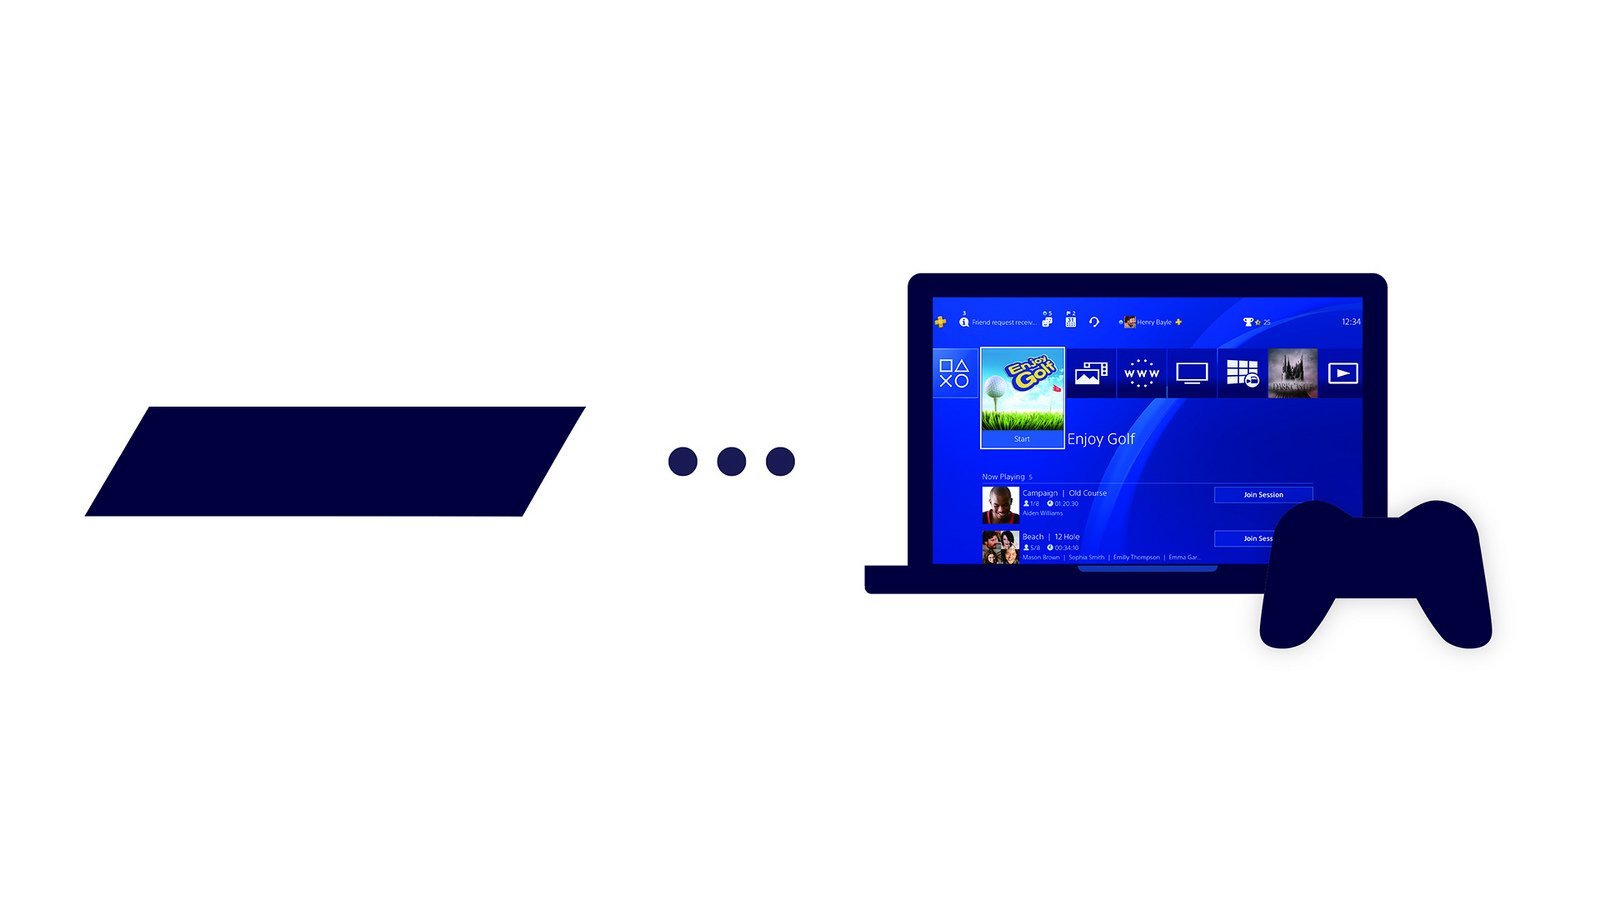 How To Connect A Ps4 Controller To Iphone Or Ipad For Remote Play